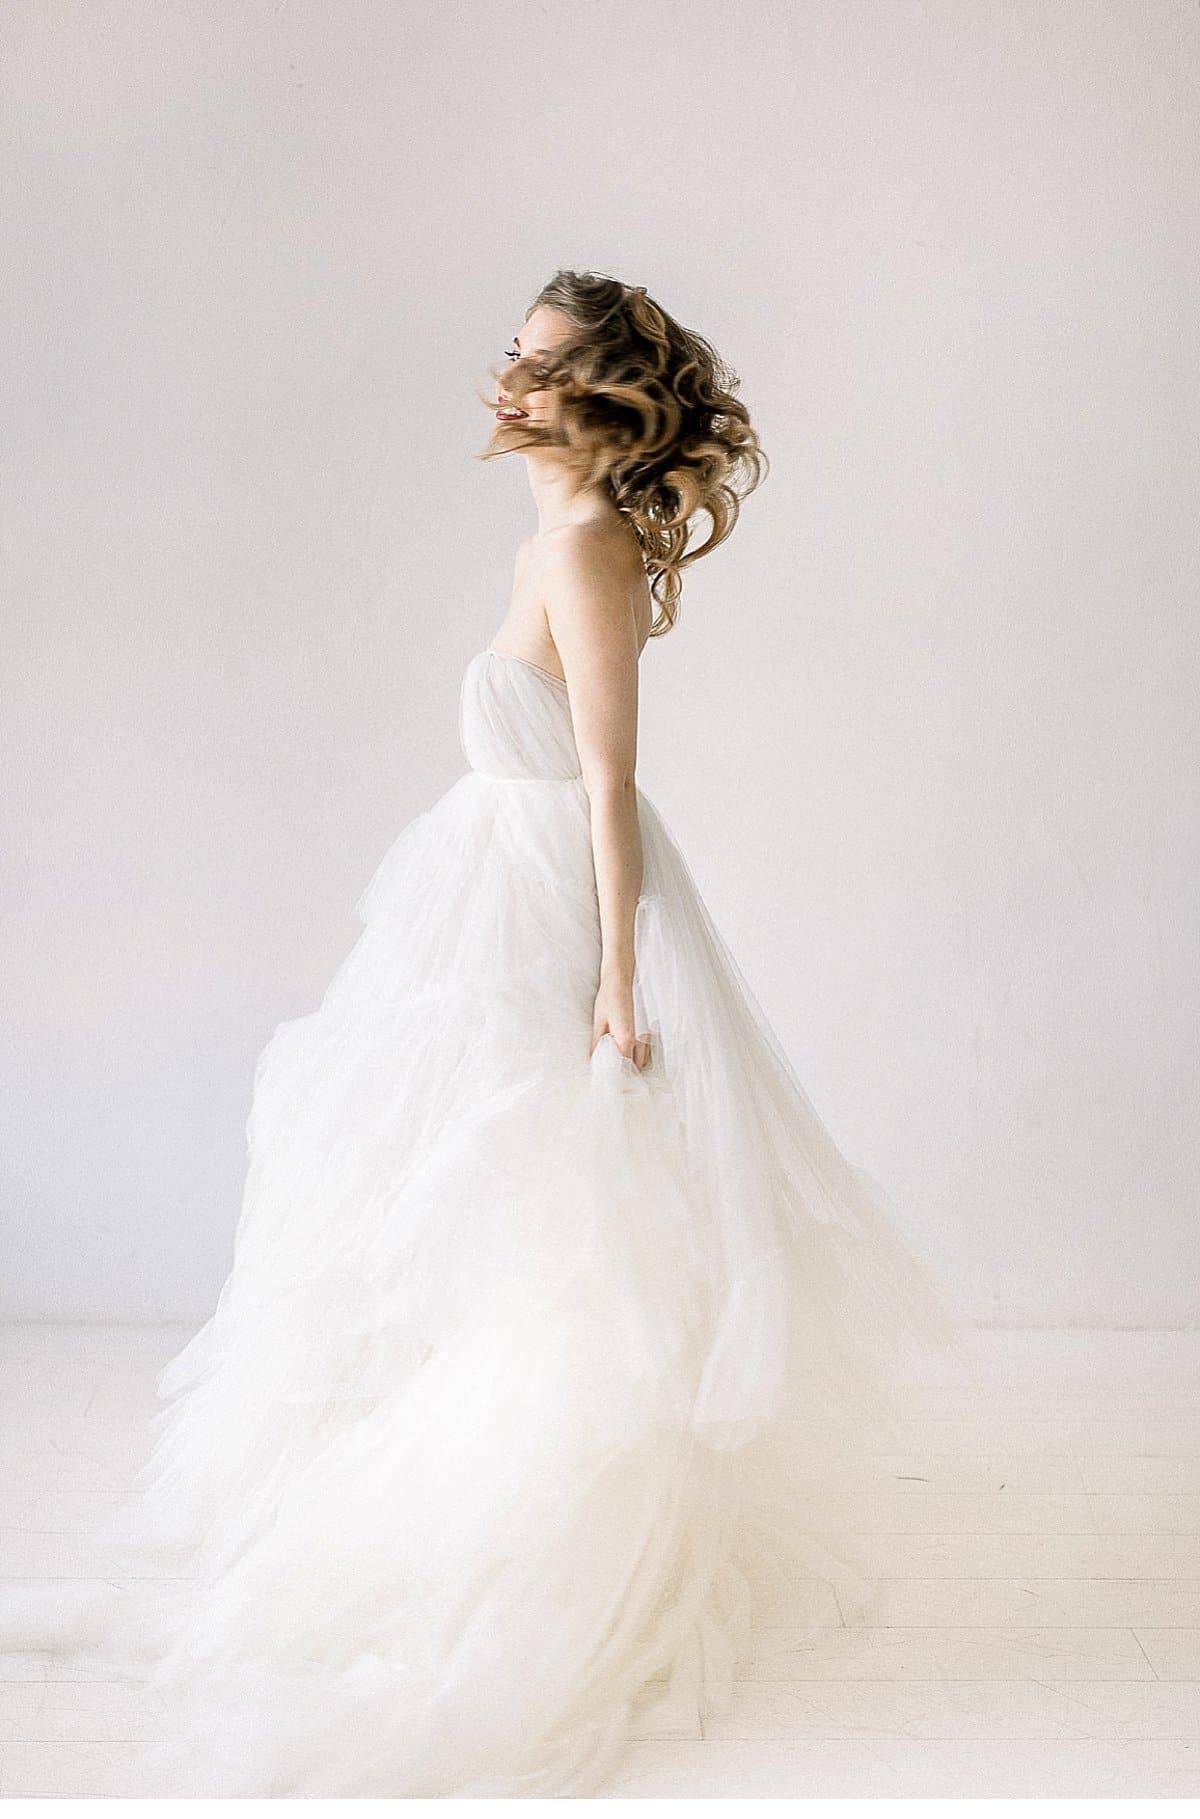 Bridal Fashion of Extravagance by Diana Frohmüller Photography ...